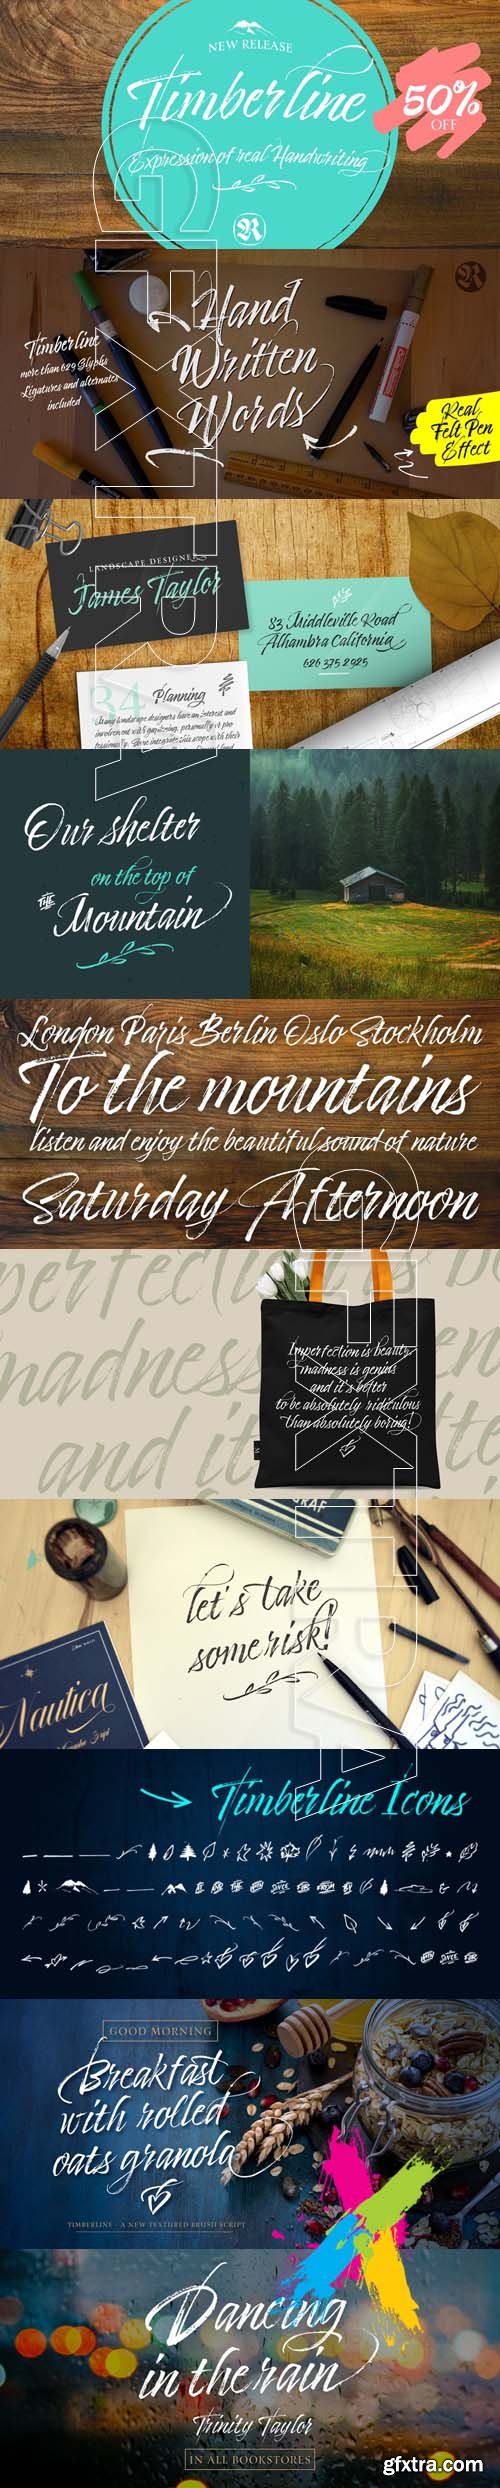 Timberline font family - $68.00